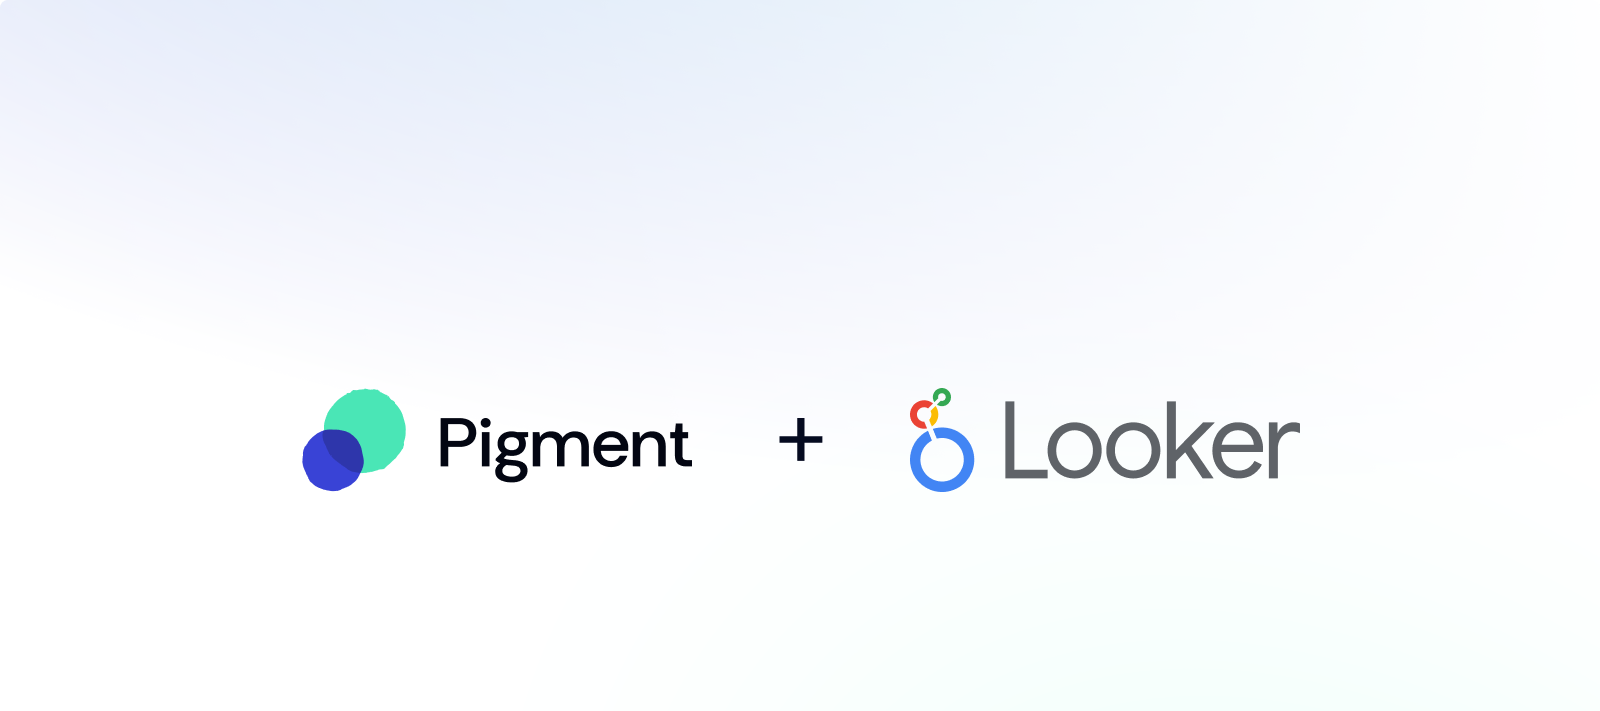 How to push data from Looker to Pigment